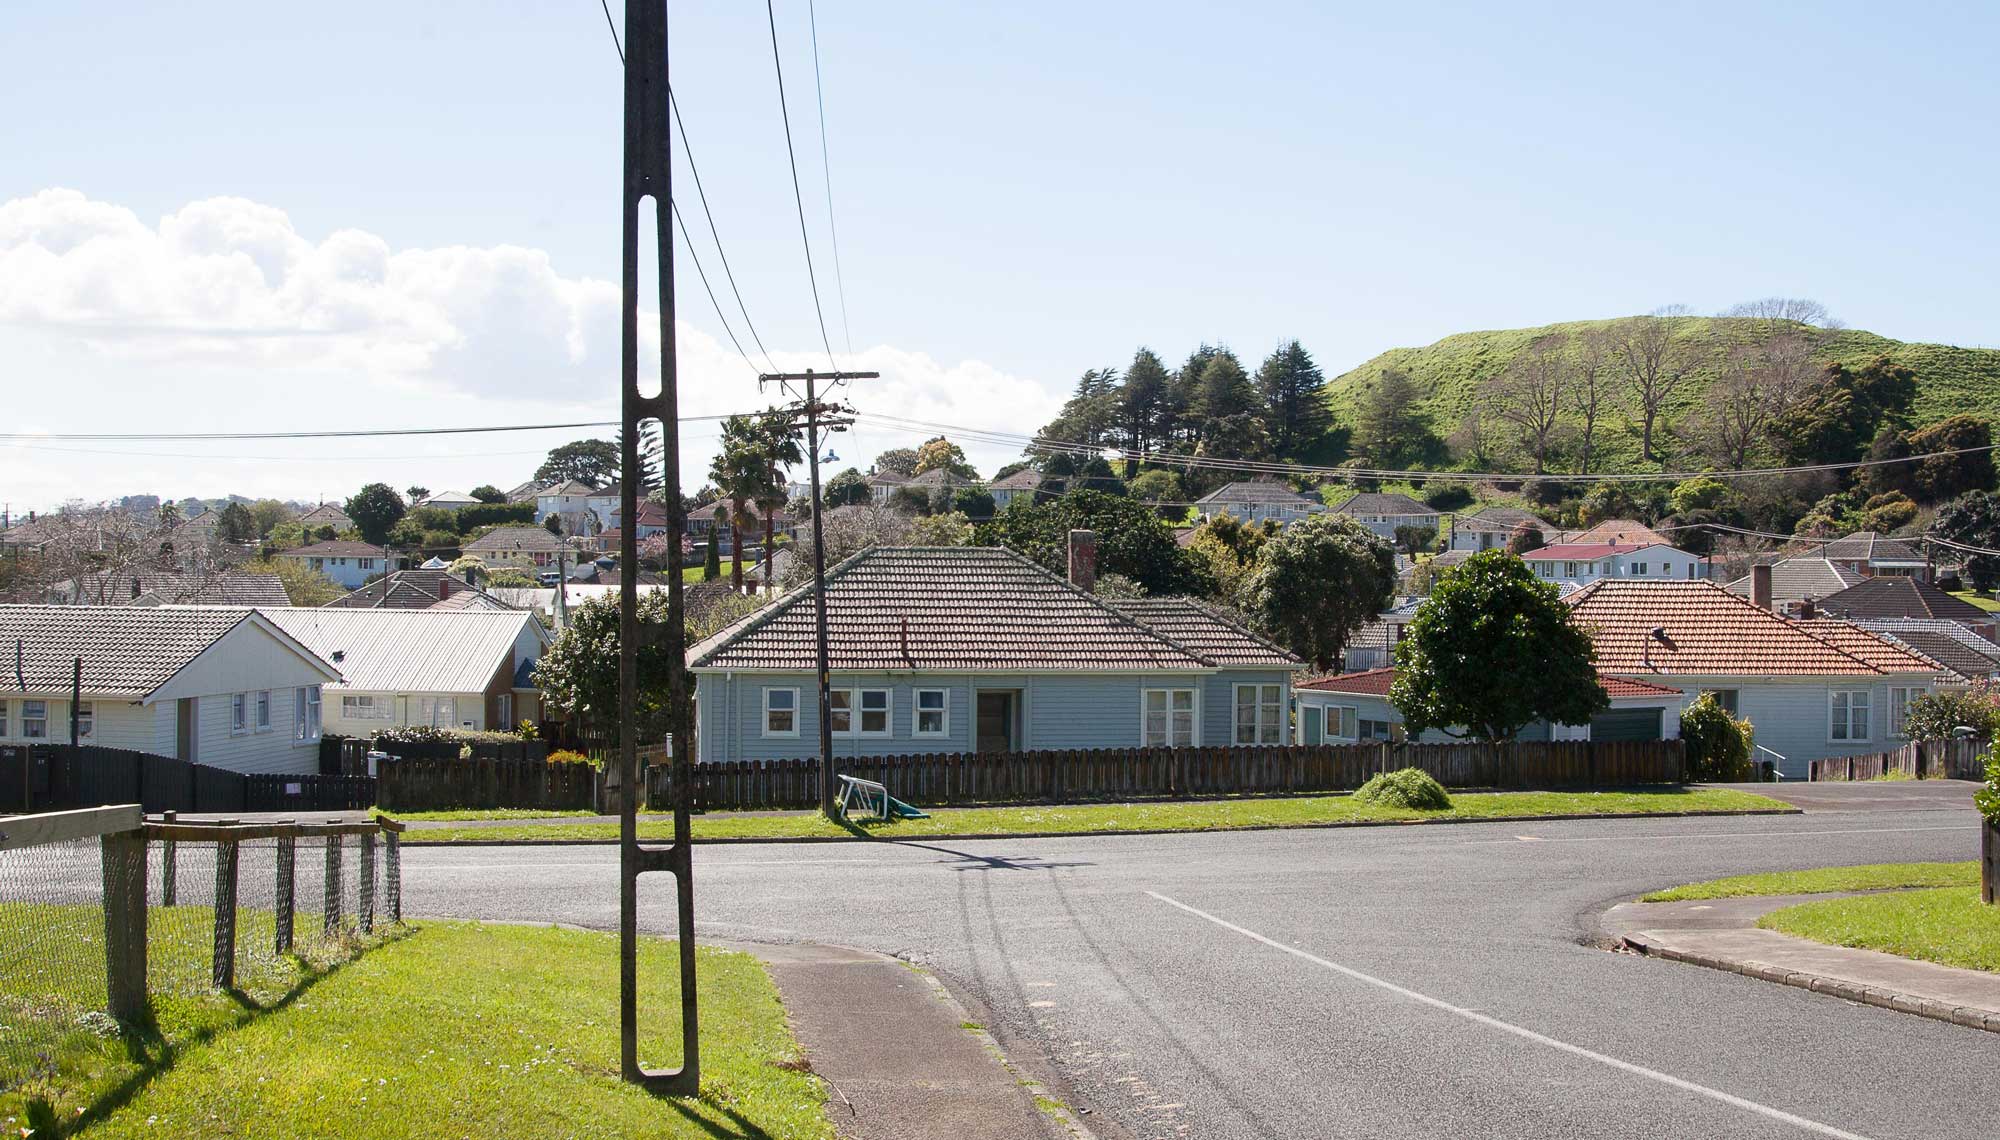 Roskill South Dry Homes